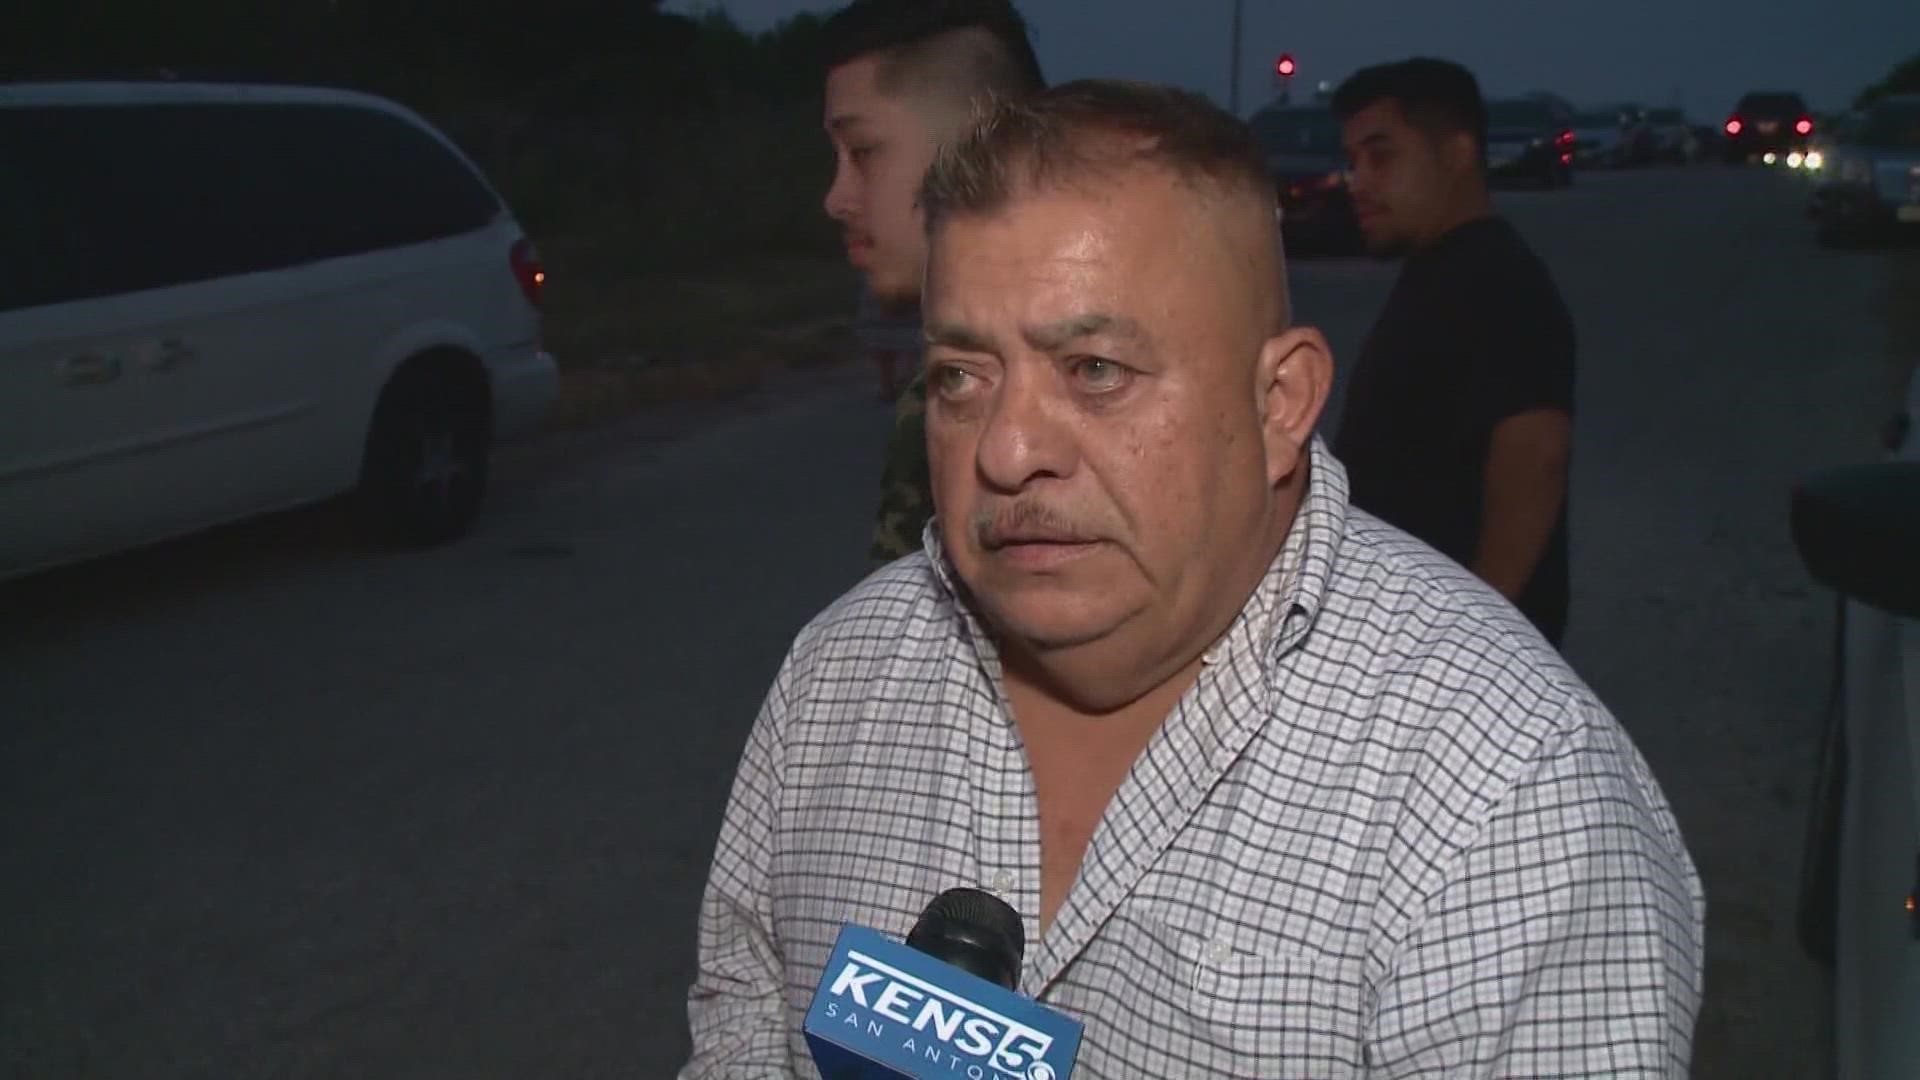 The man told KENS 5 he can't believe there were any survivors at all because of the intense heat and no water.